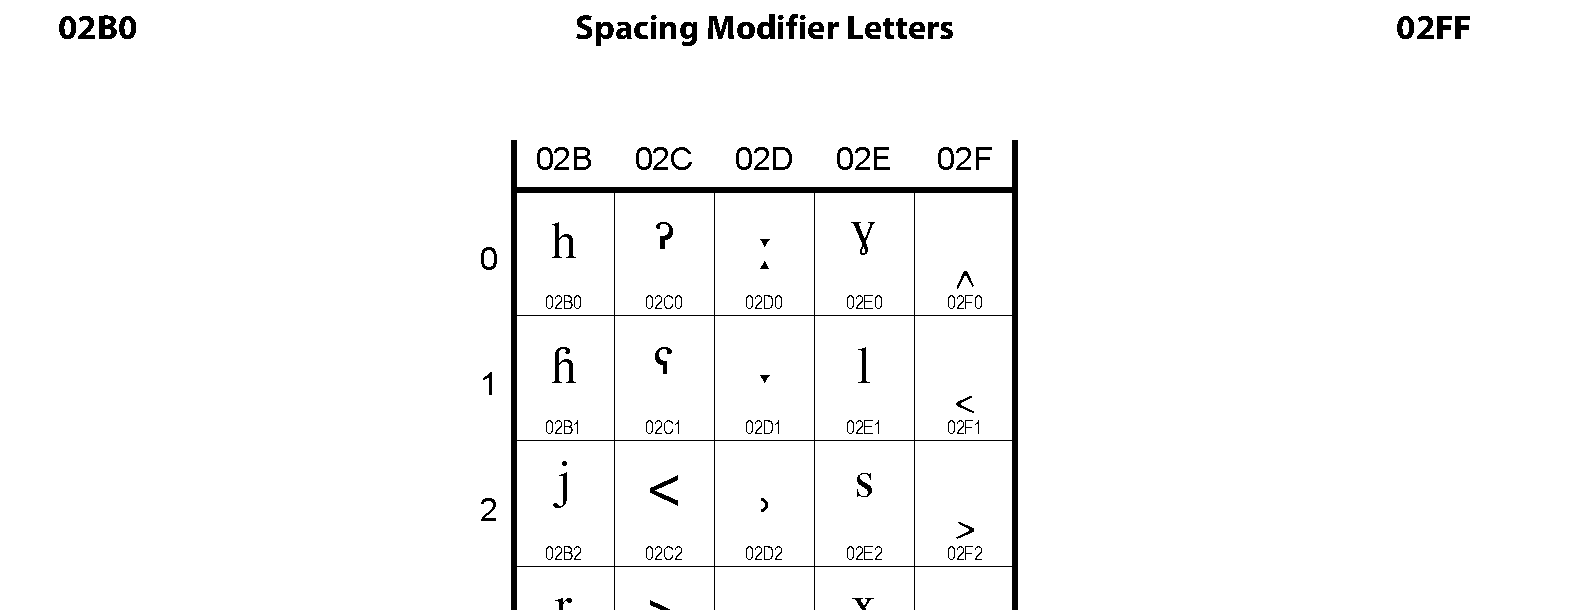 Unicode - Spacing Modifier Letters